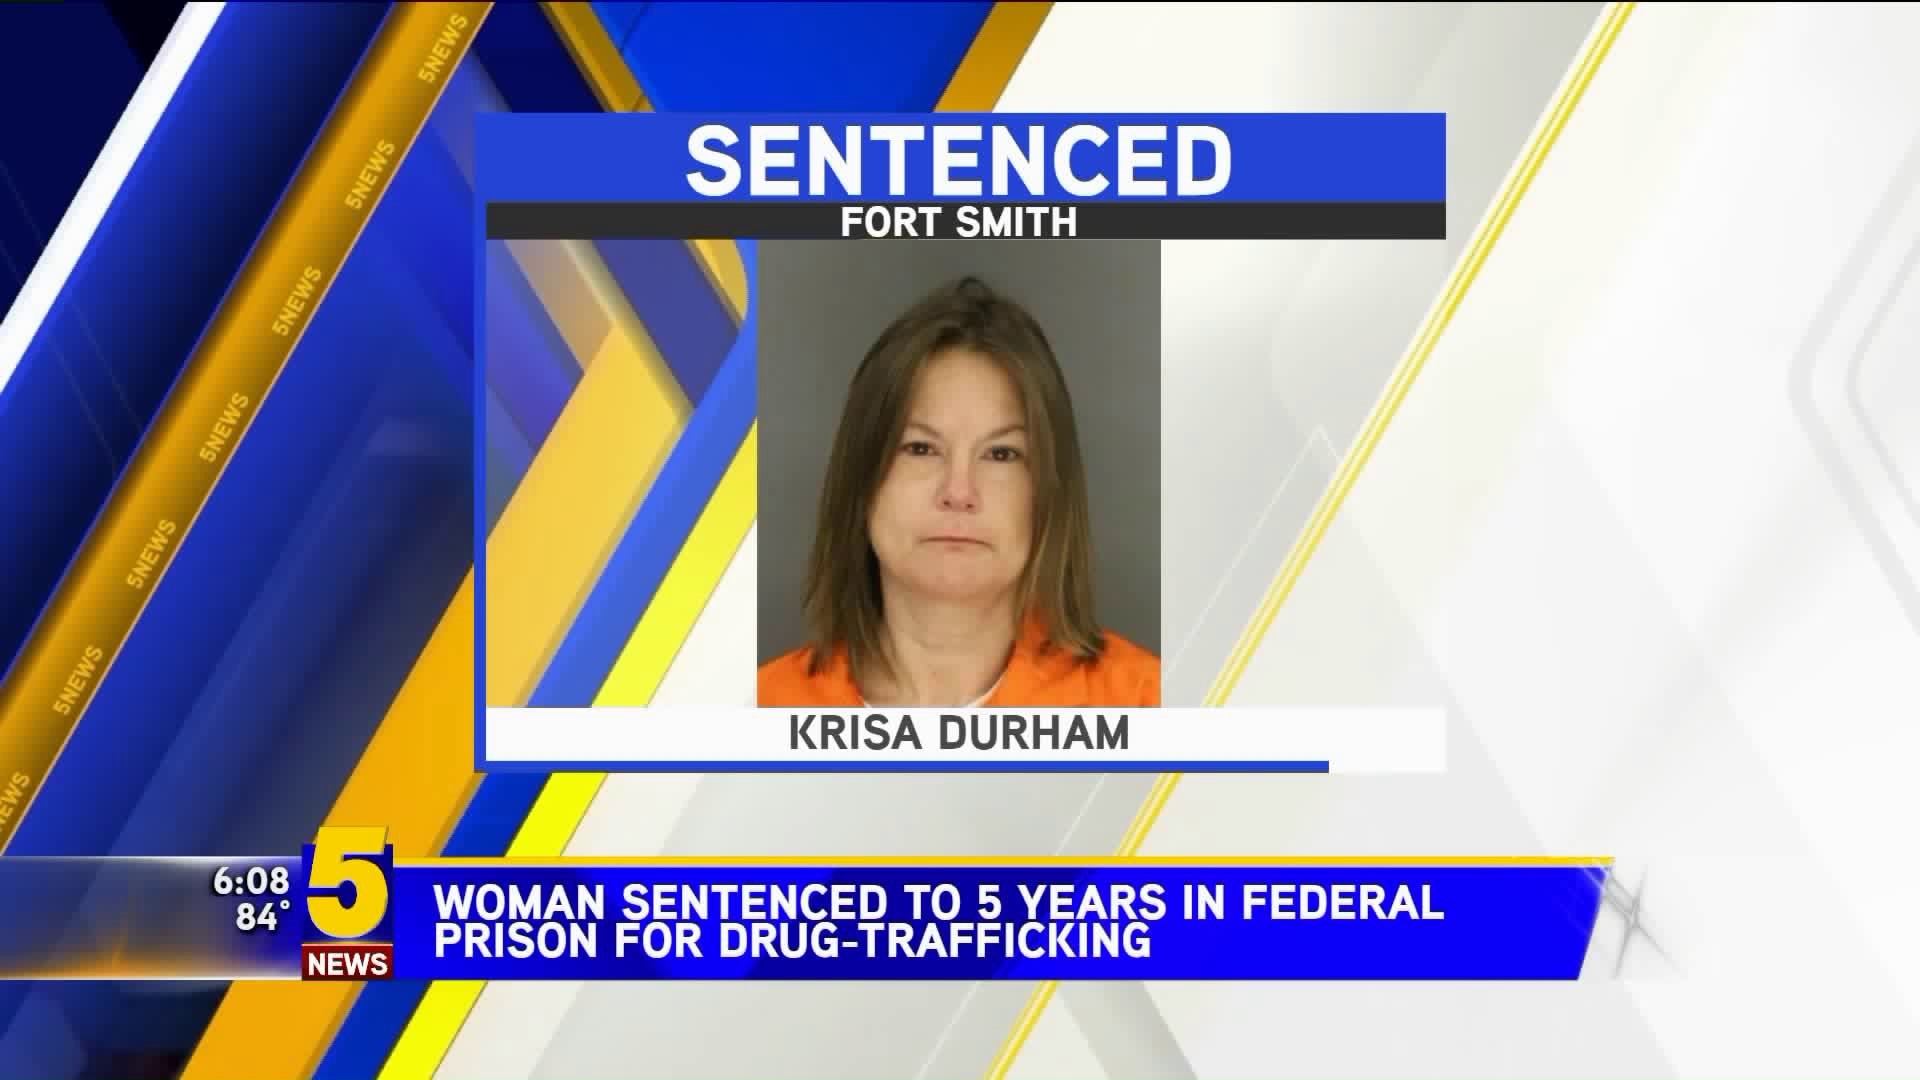 Fort Smith Woman Sentenced to 5 Years in Federal Prison for Trafficking Meth